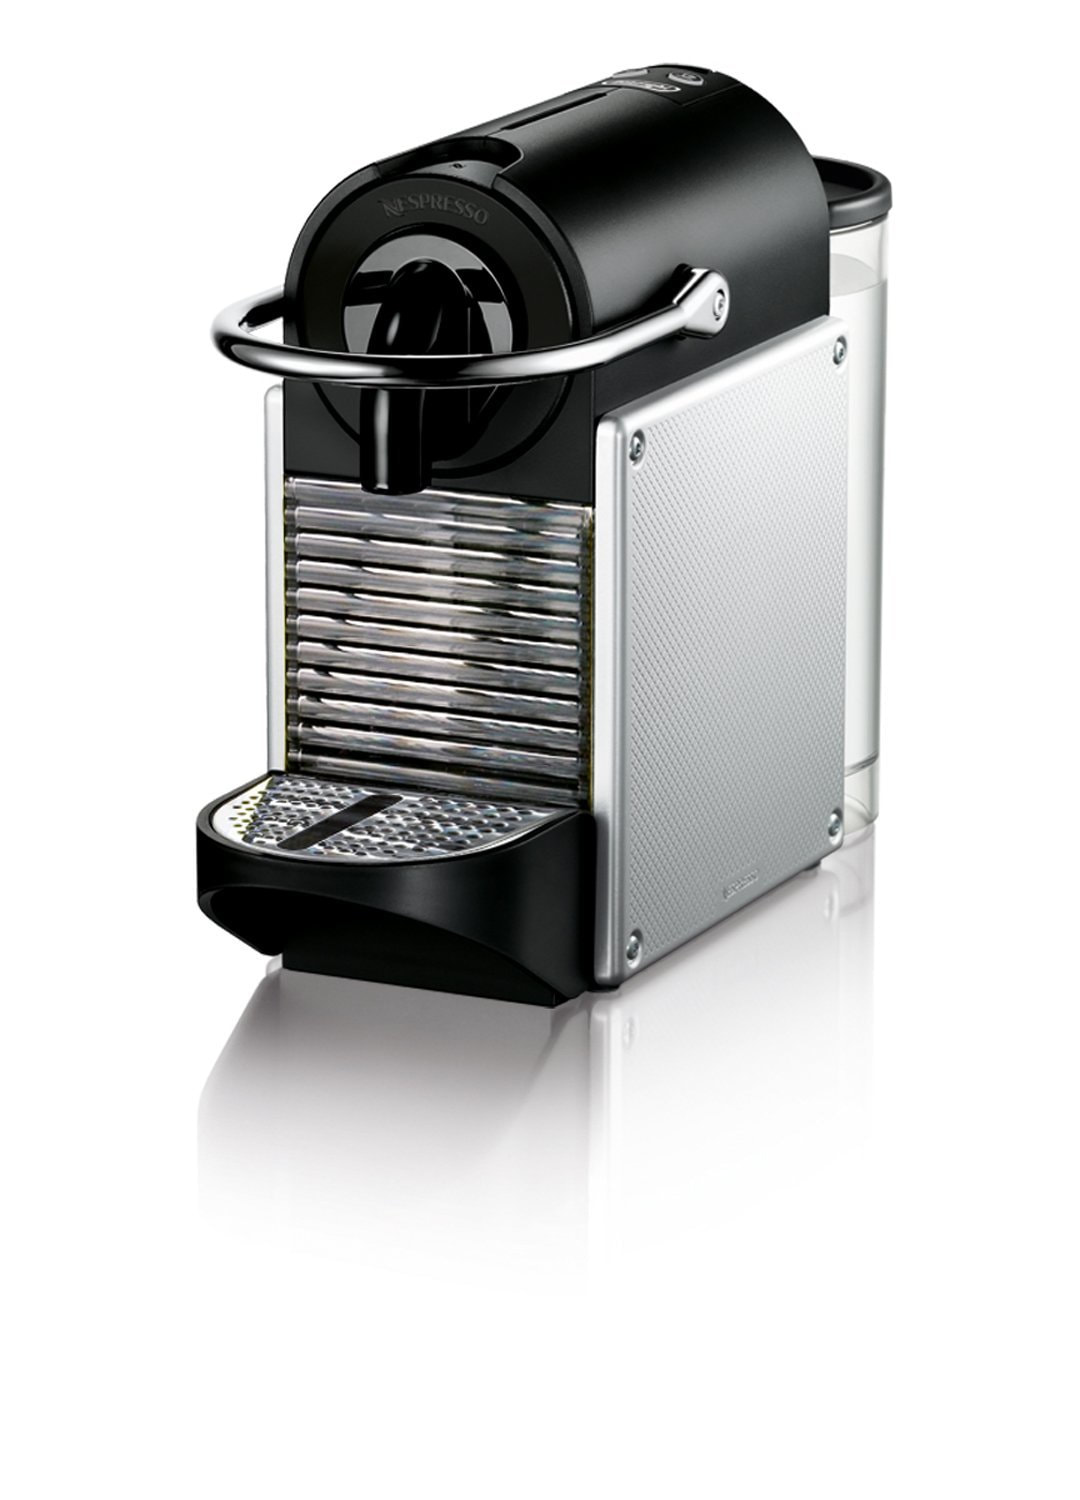 Nespresso Pixie featured on Mother's Day Gifts for Coffee Lovers on BusyNestNews.com